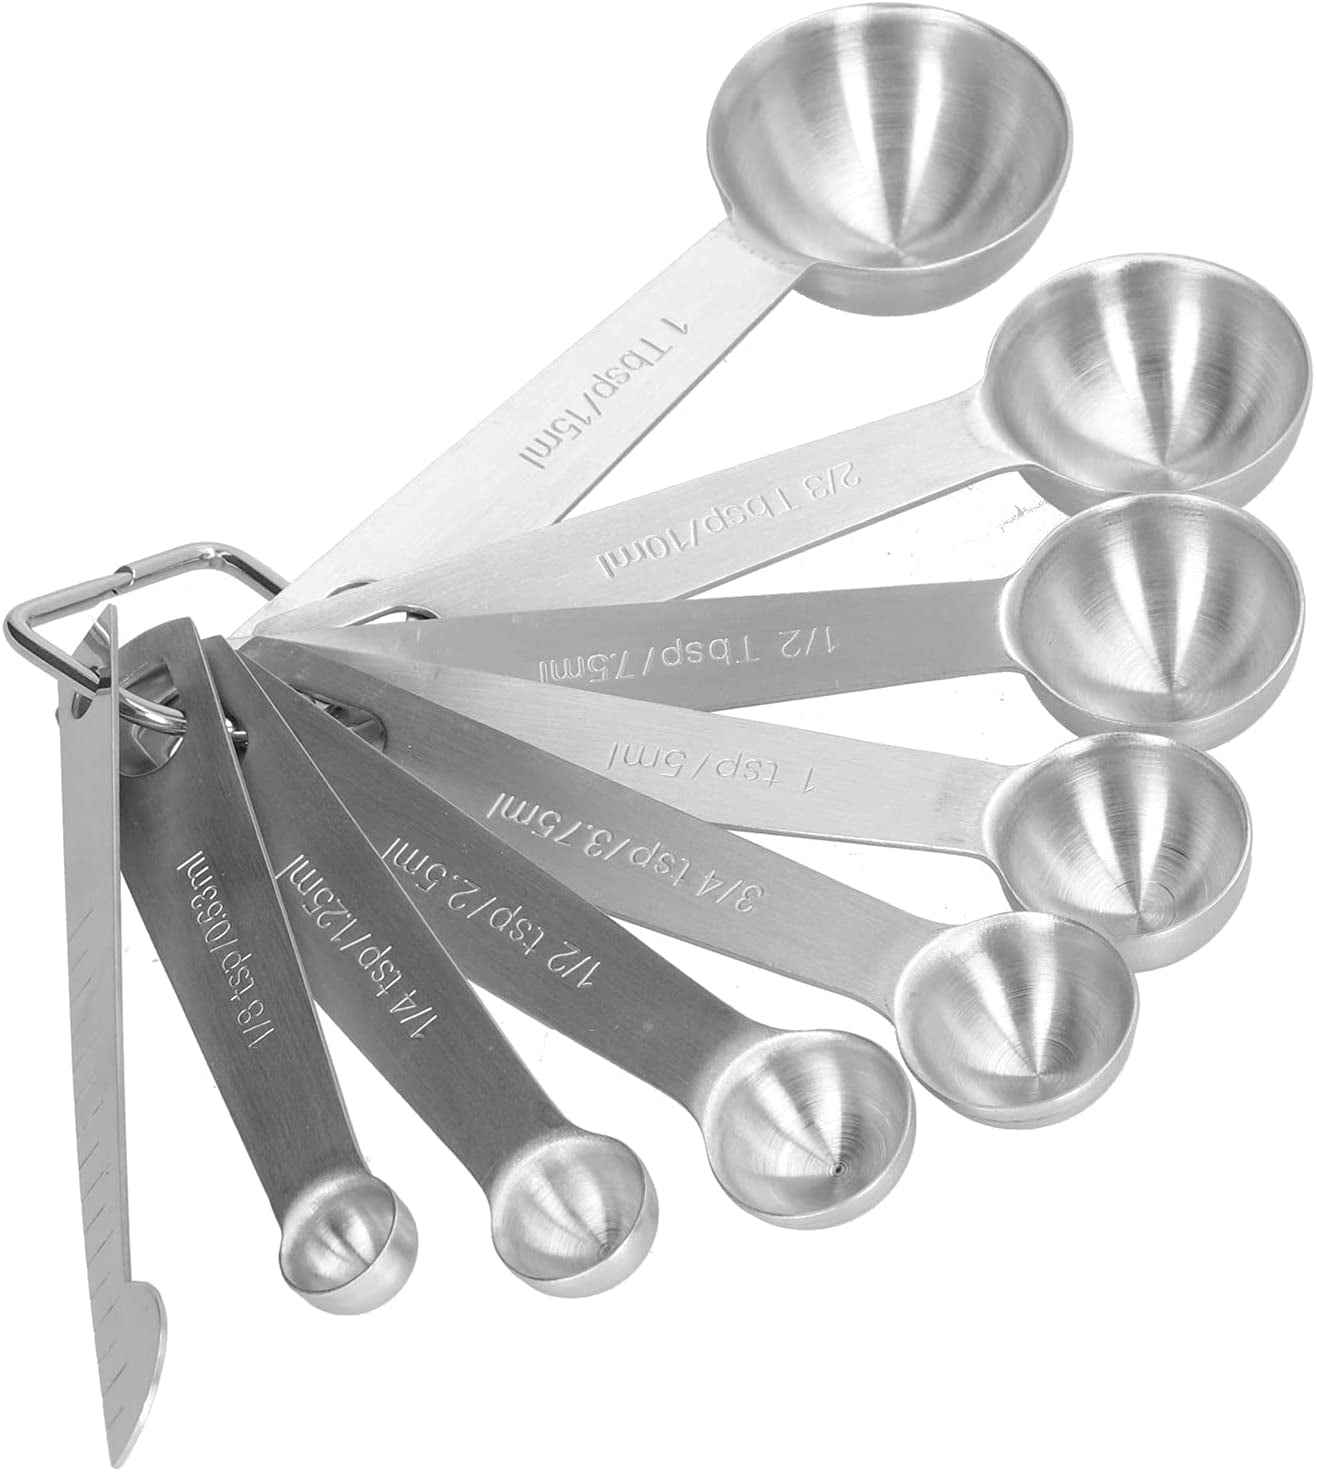 6pcs Stainless Steel Measuring Spoons Stackable Teaspoon Tablespoon for Measure, Size: 13x4.5cm